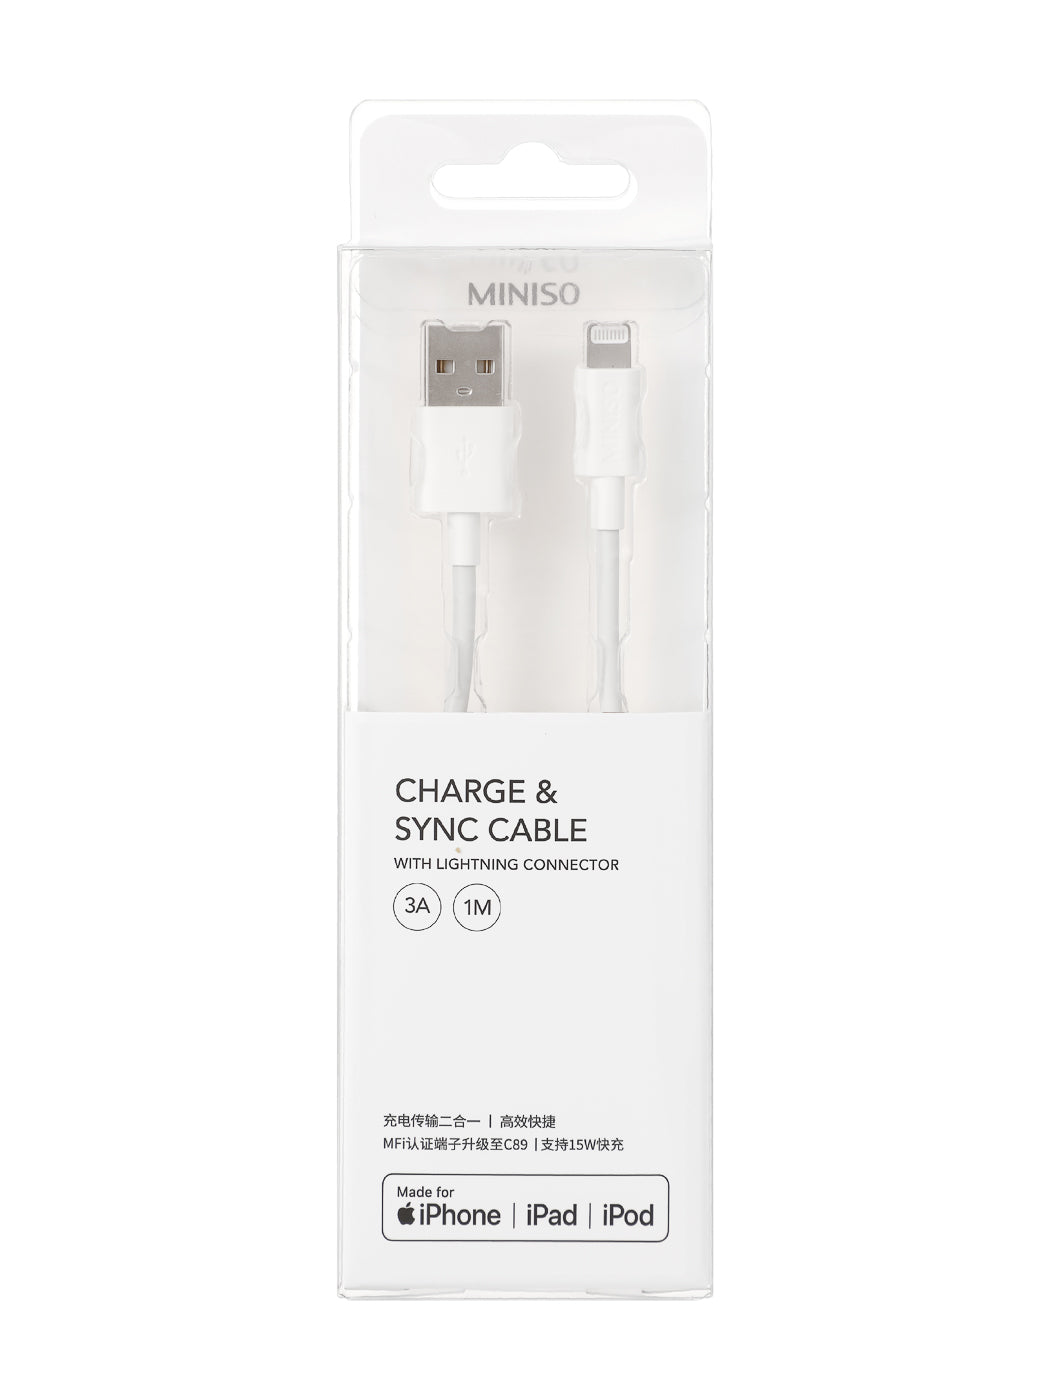 MINISO 1M FAST CHARGE CHARGE & SYNC CABLE WITH LIGHTNING CONNECTOR (WHITE) 2010251512106 CHARGING CABLE WITH LIGHTNING CONNECTOR